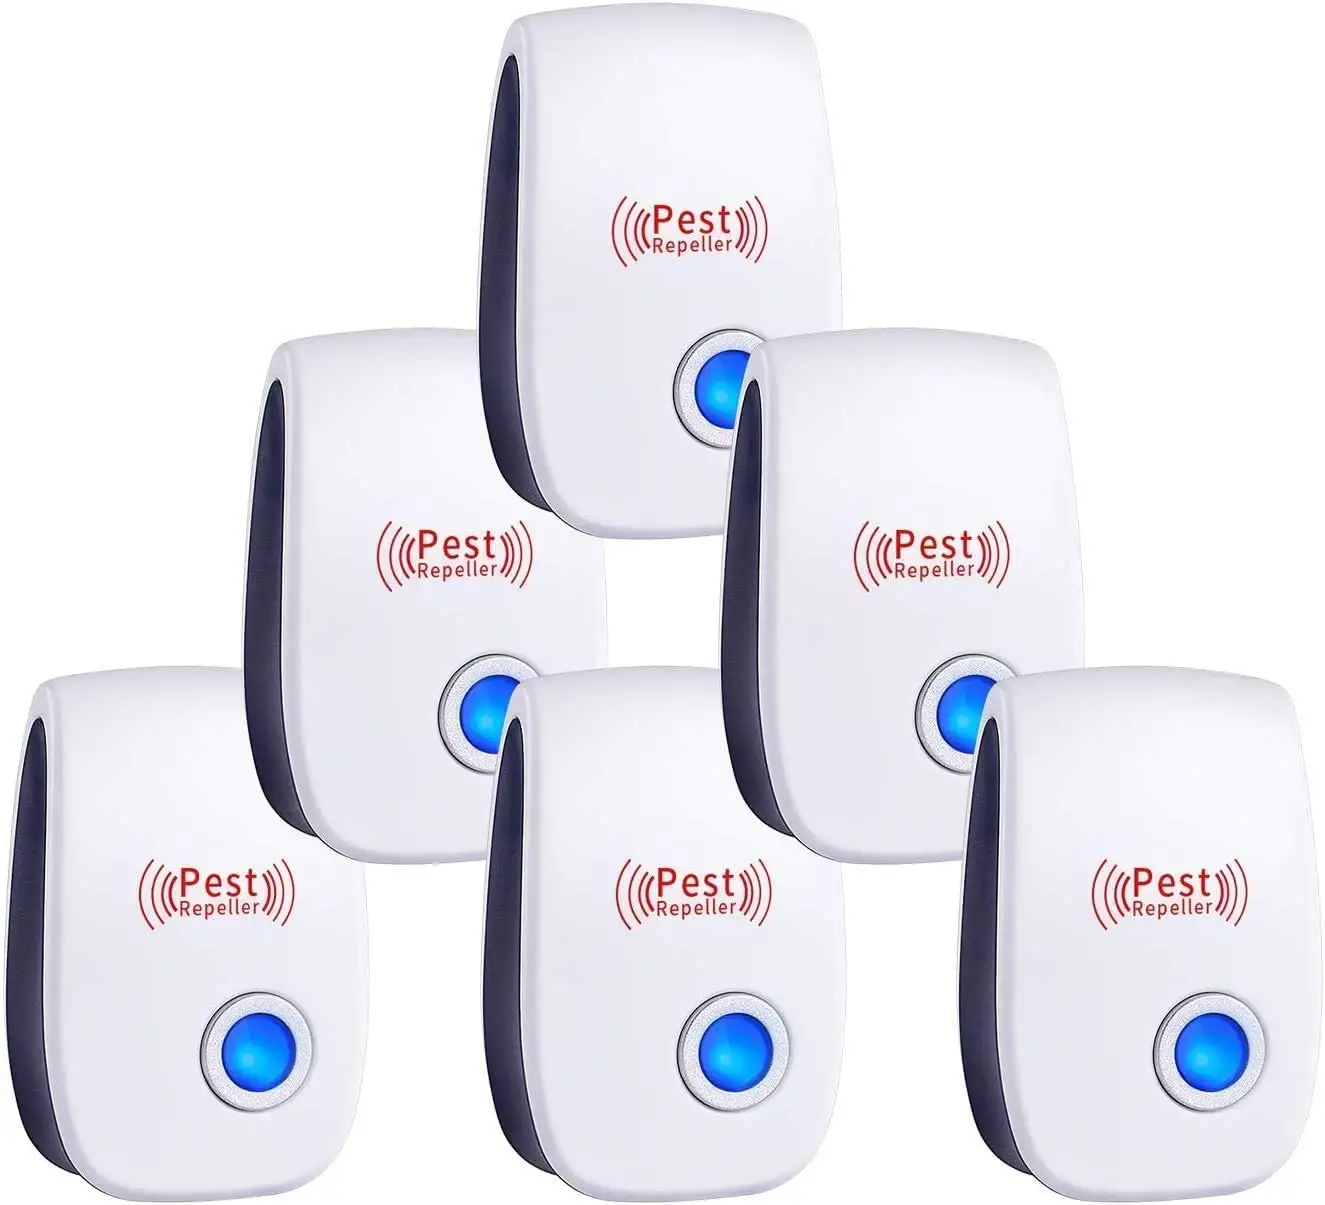 Ultrasonic Pest Repeller Plug in Mosquito Repell-ent Electronic Pest Control for Home Kitchen Office